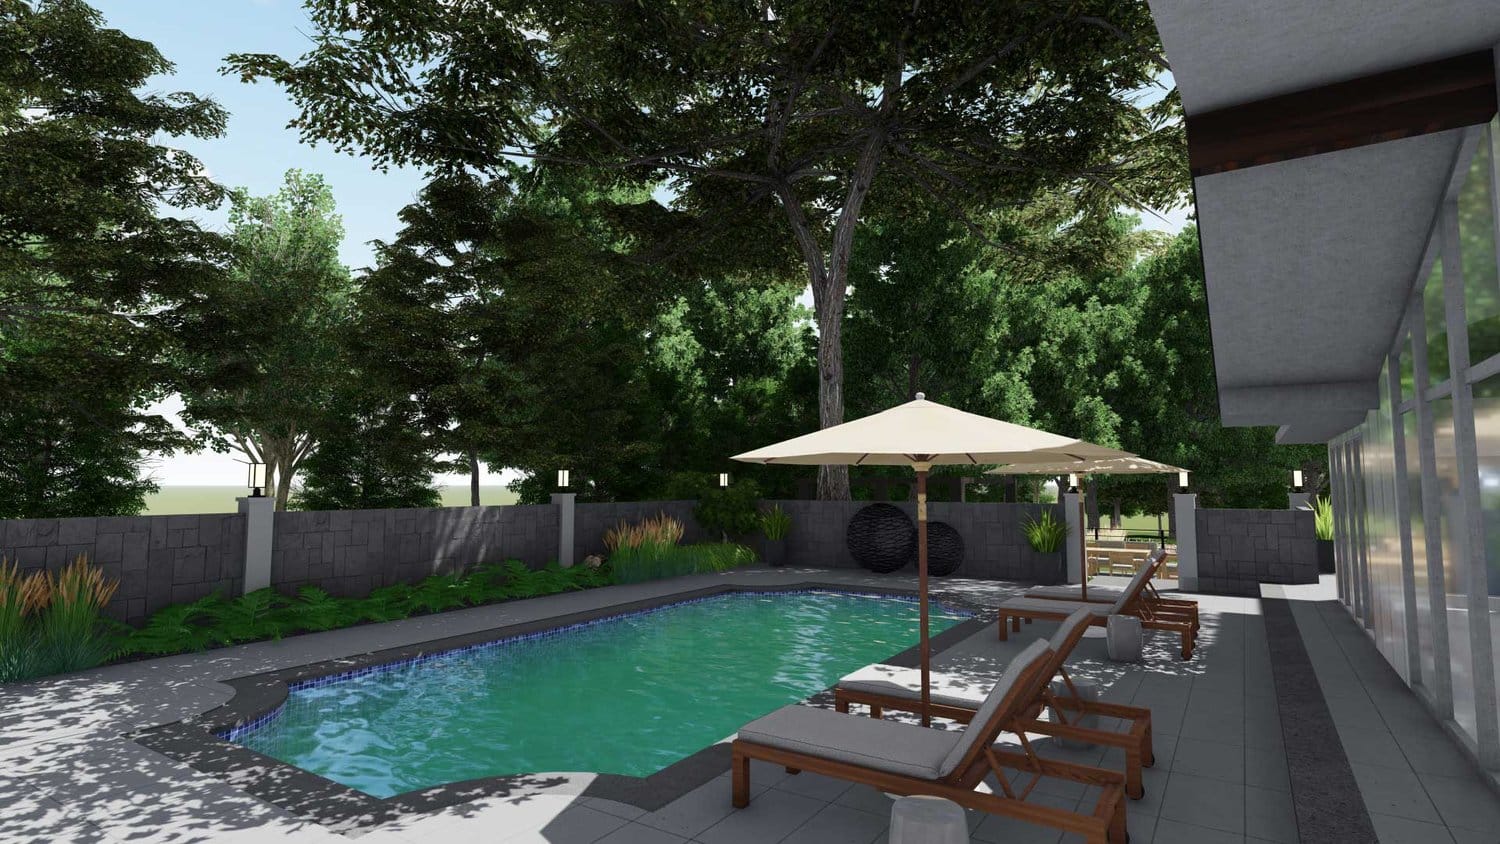 Stamford yard with pool and pool lounge chairs